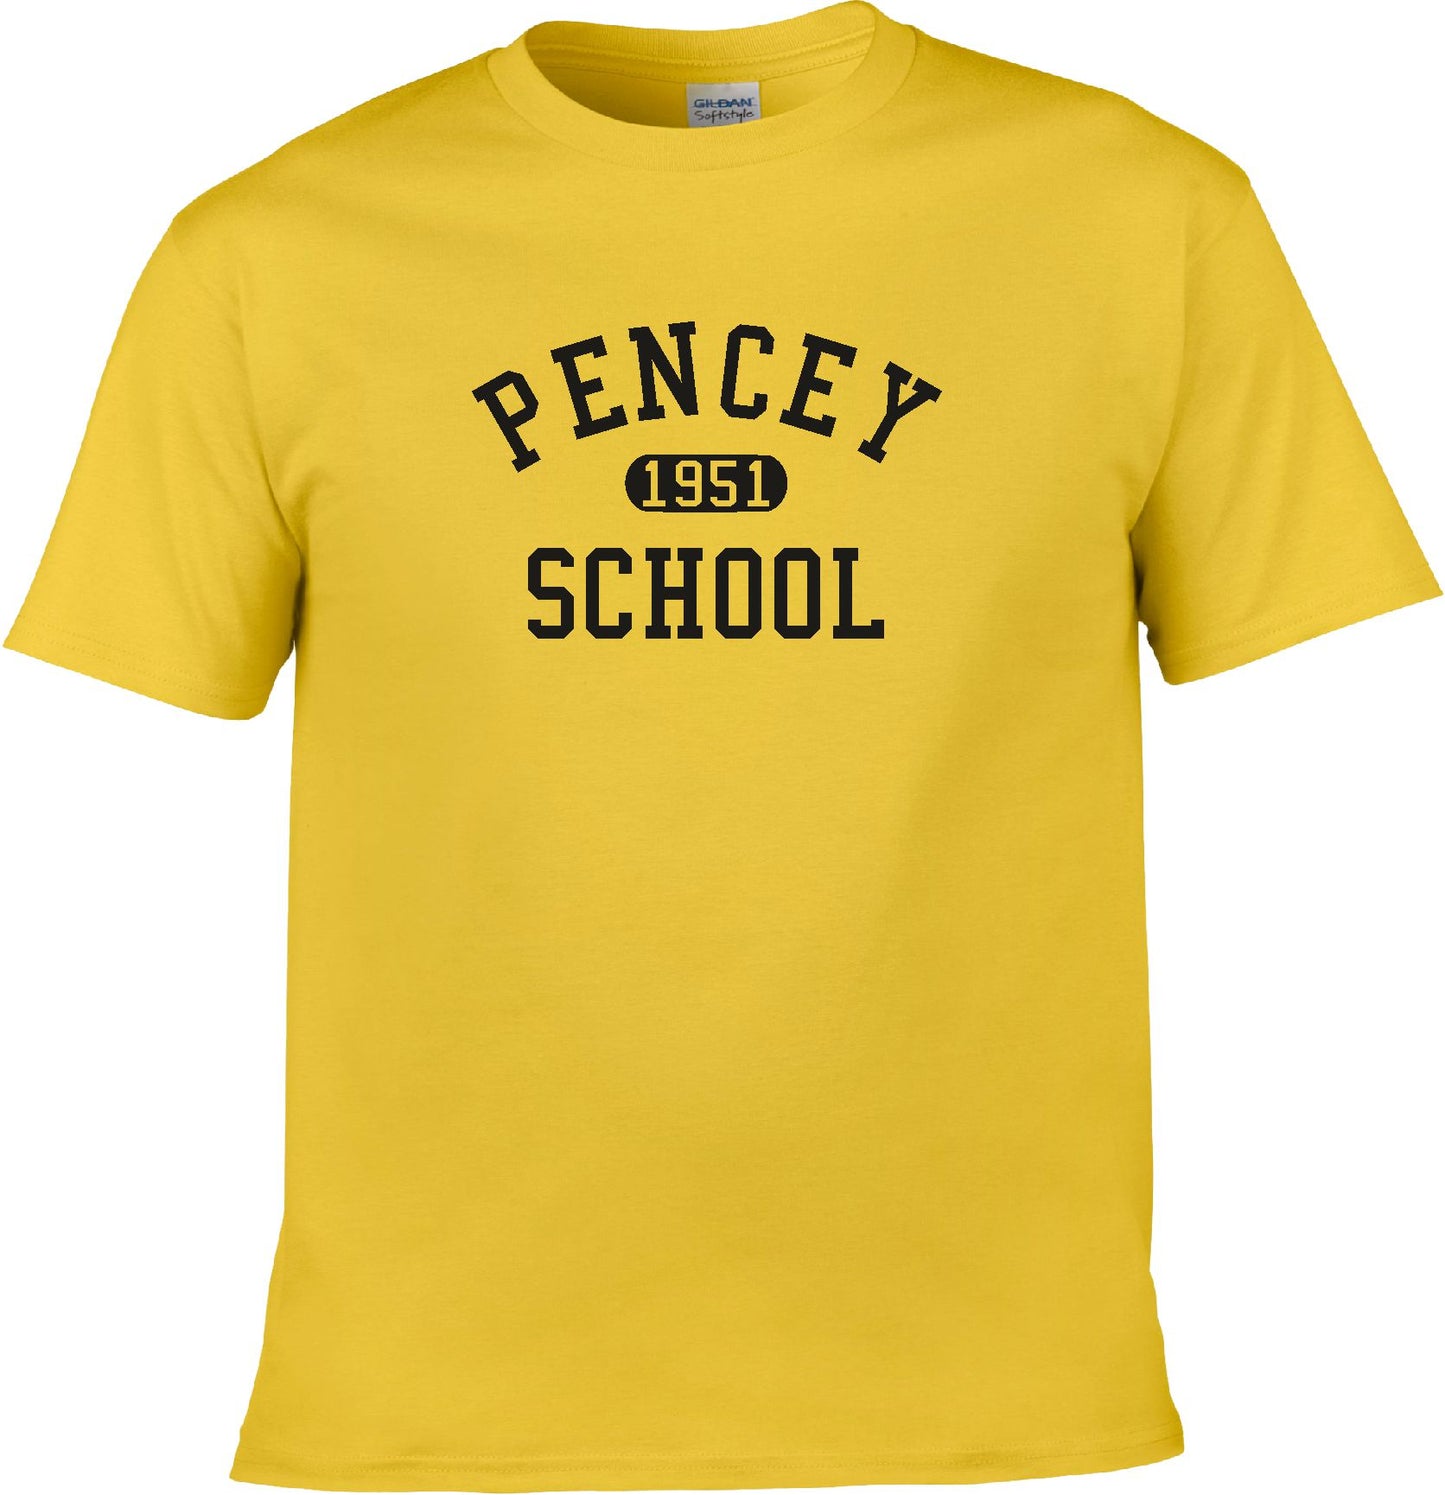 Pencey School 1951 T-Shirt - The Catcher in the Rye, Literature, College Style, Preppy, Various Colours